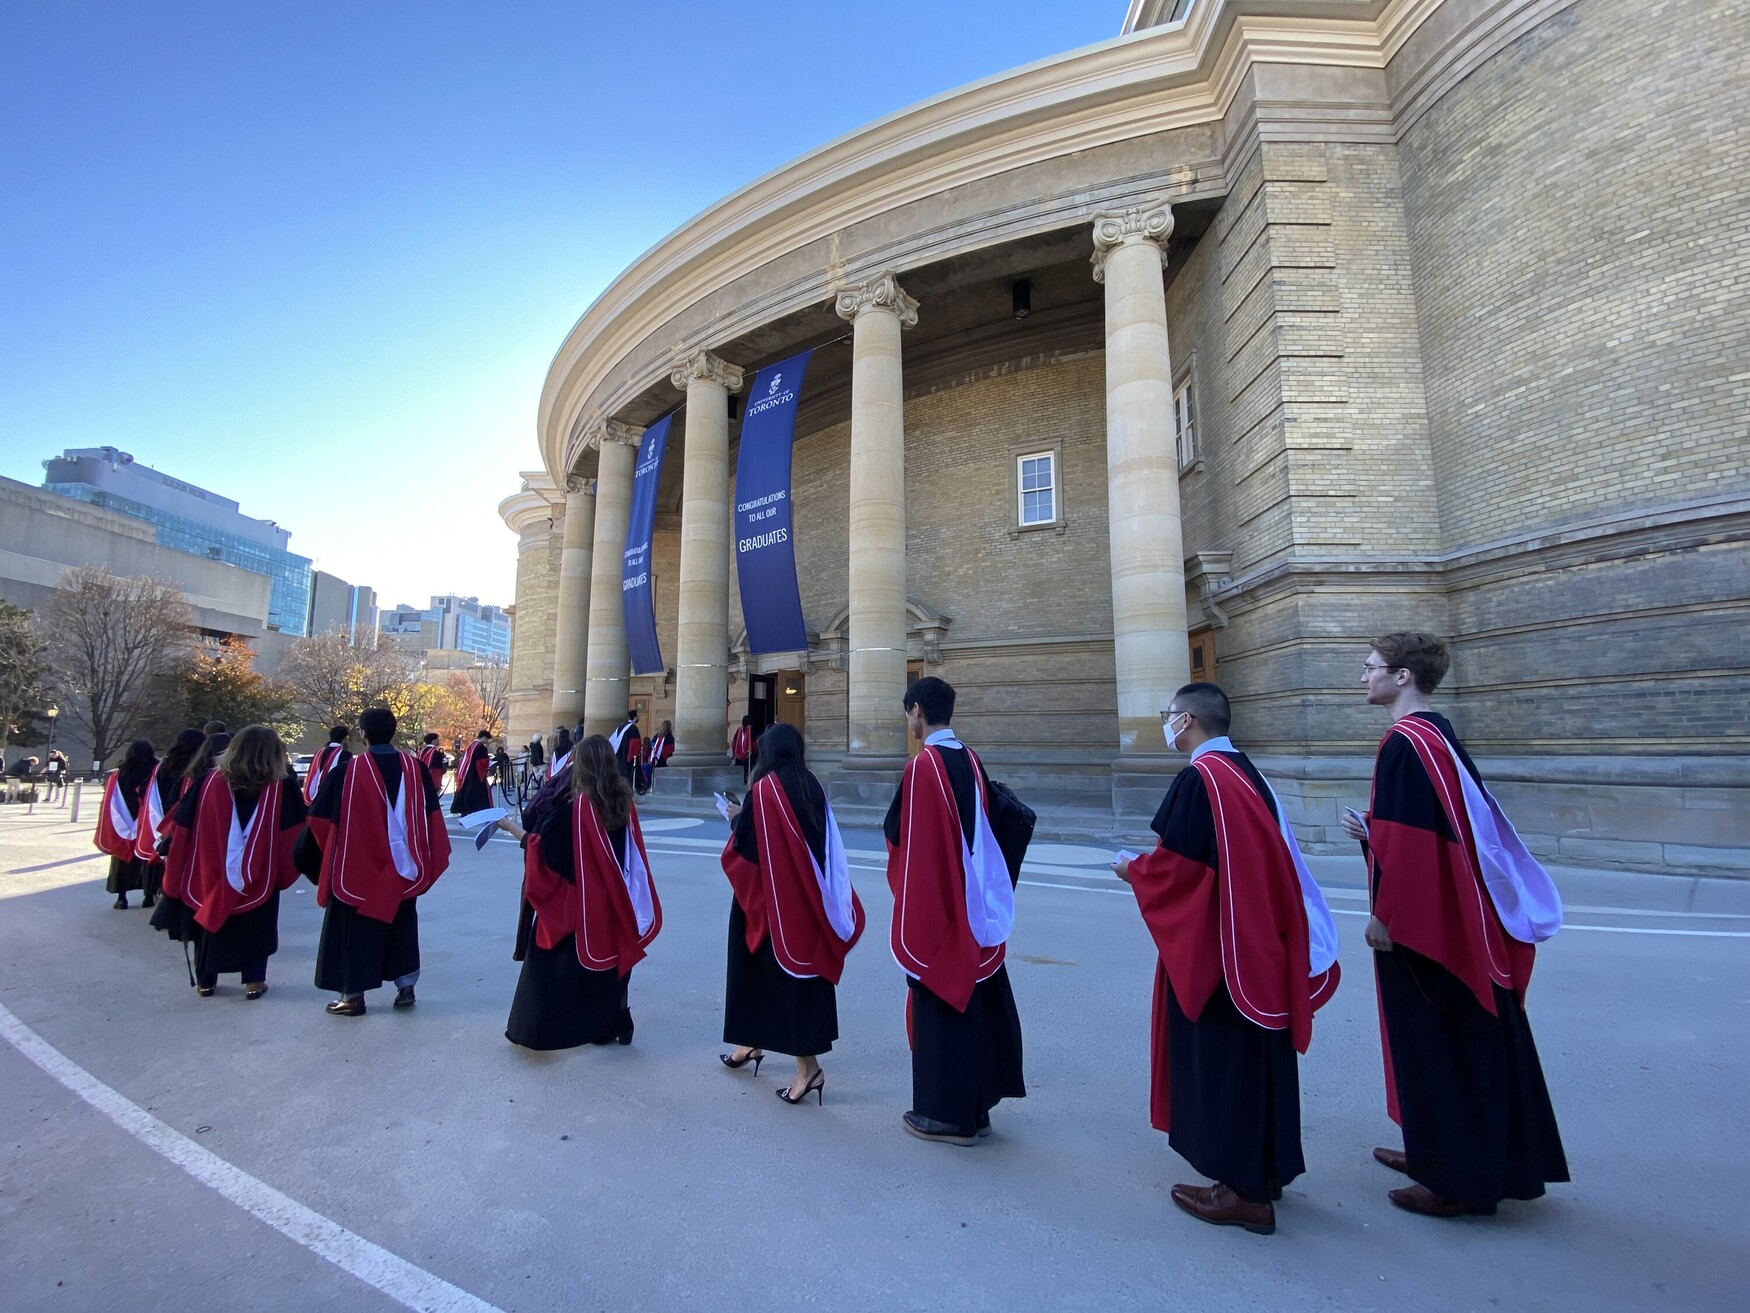 Graduands from the Temerty Faculty of Medicine wearing their gowns walk in a line outside Convocation Hall on a sunny fall day.